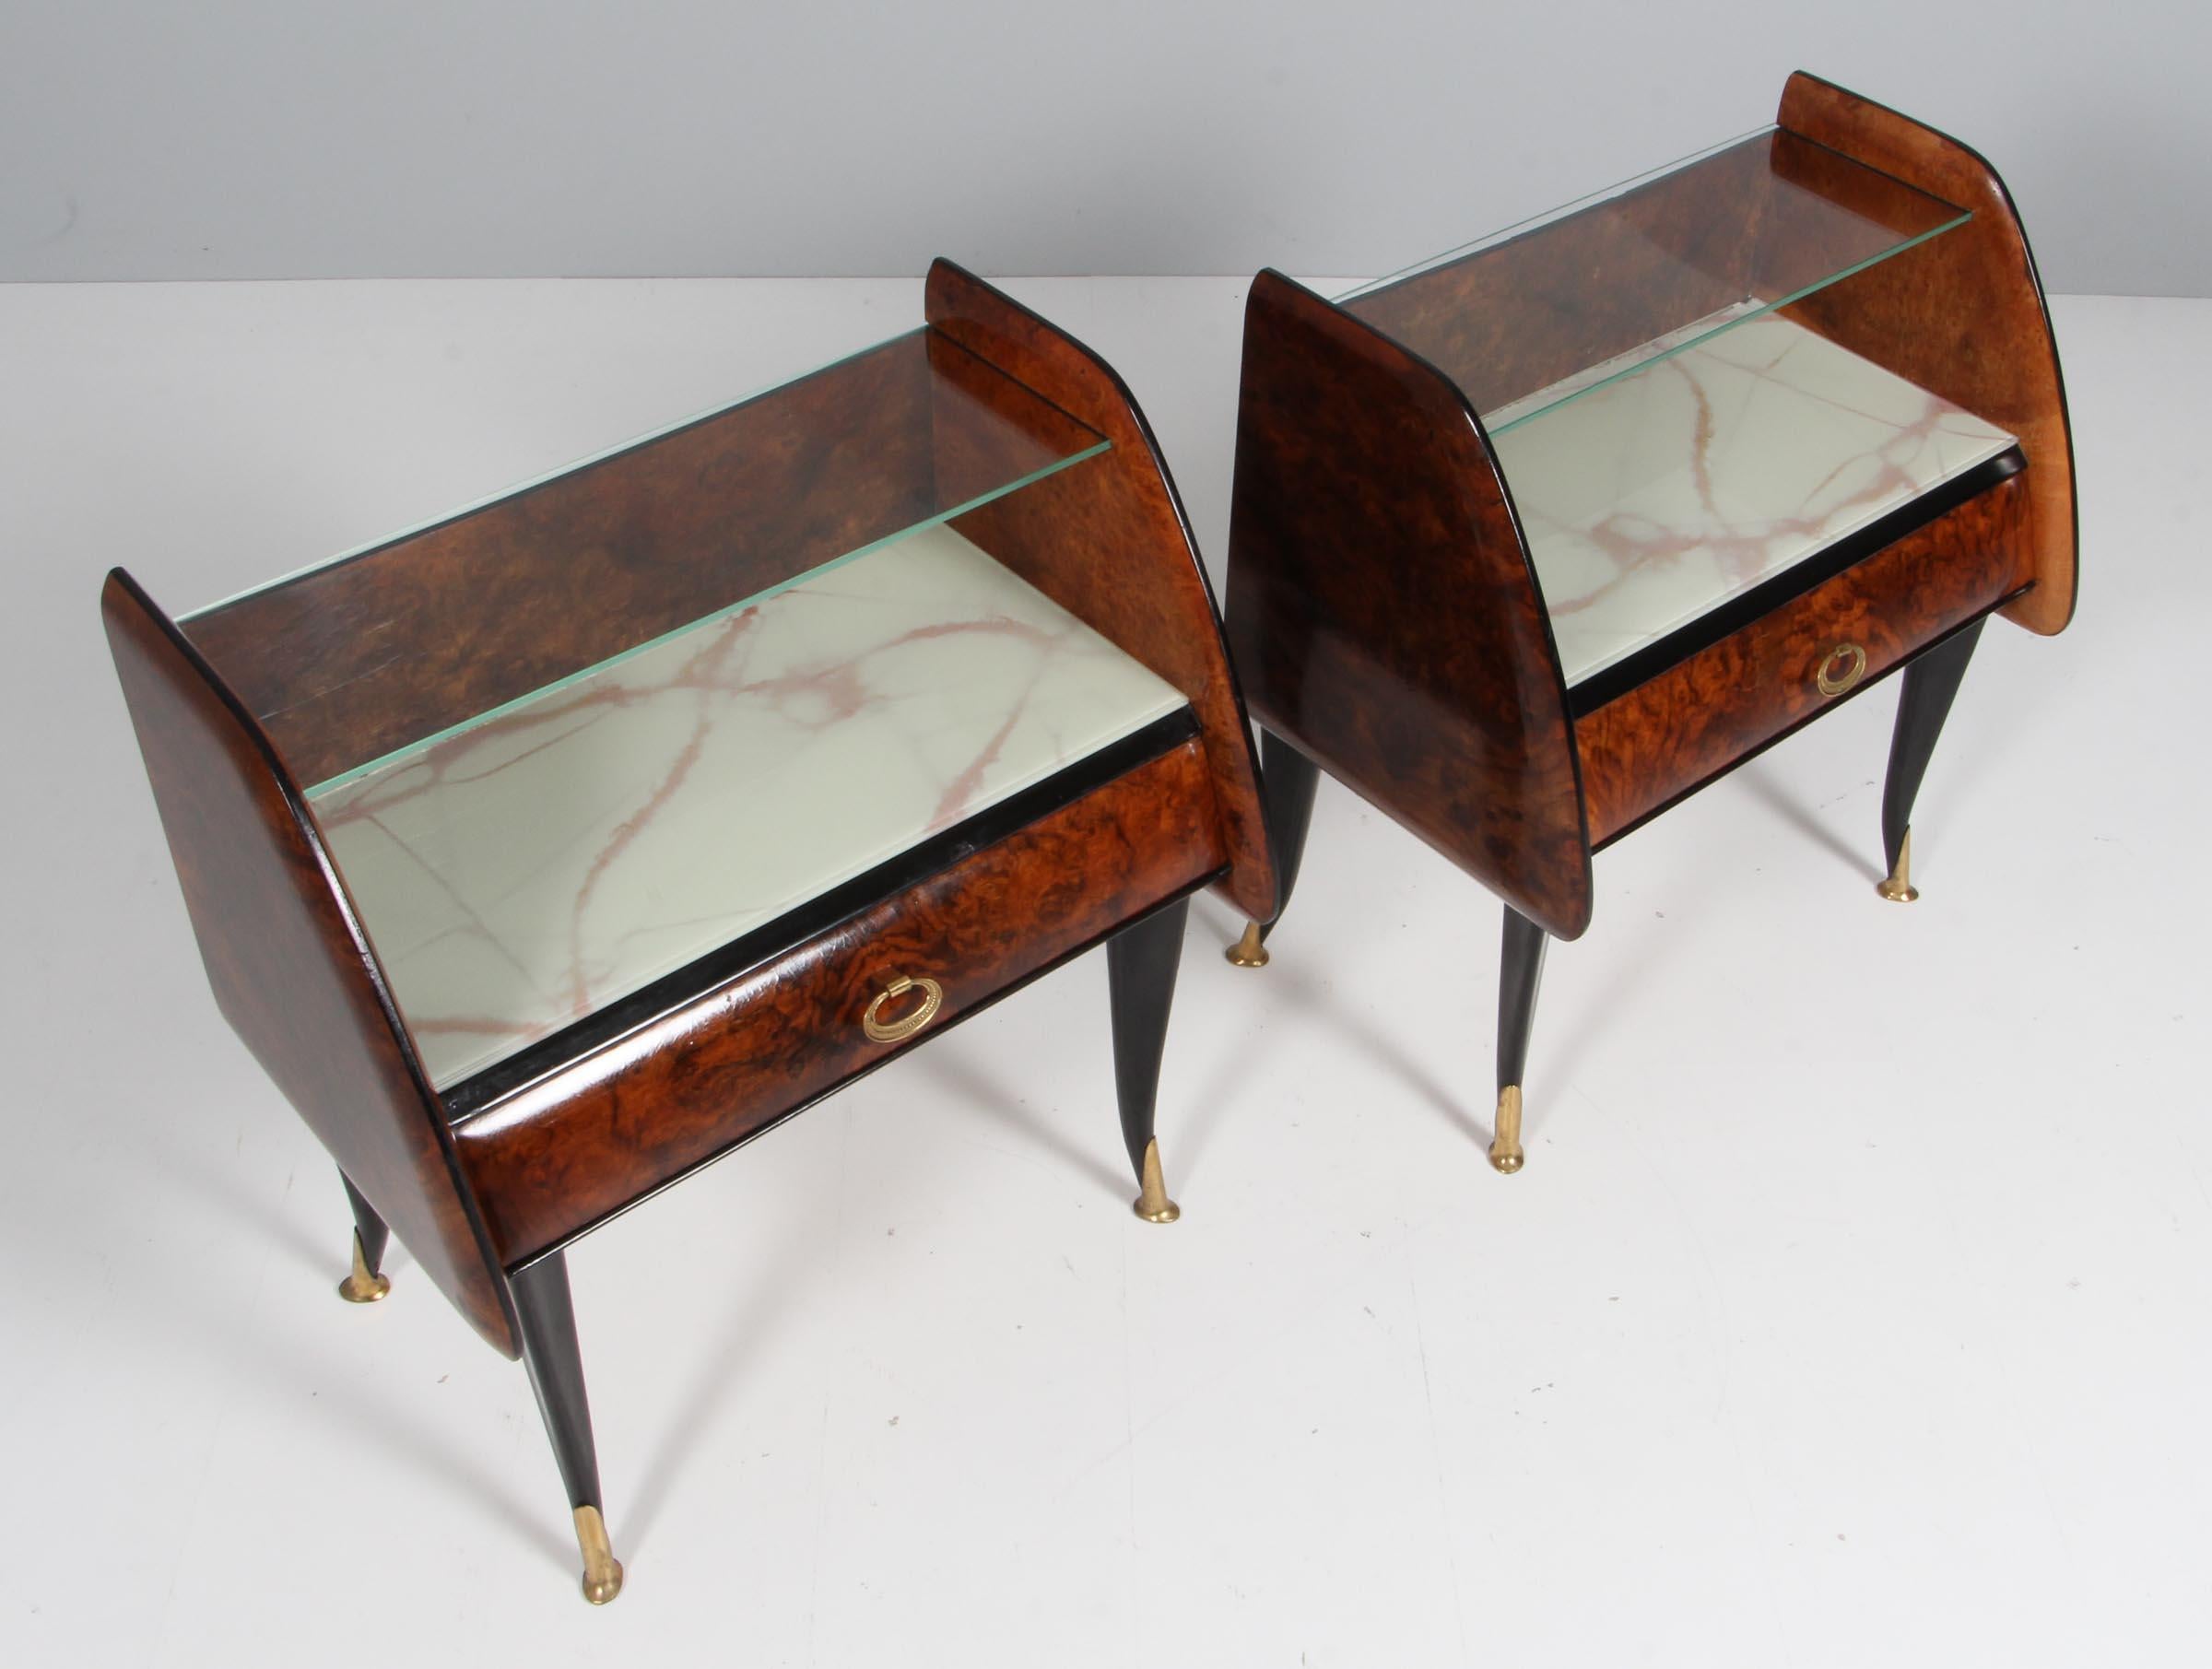 Art Deco Italian night stands with glass tops and brass details.

Made of veenered root tree.

Probably made in the 1960s.